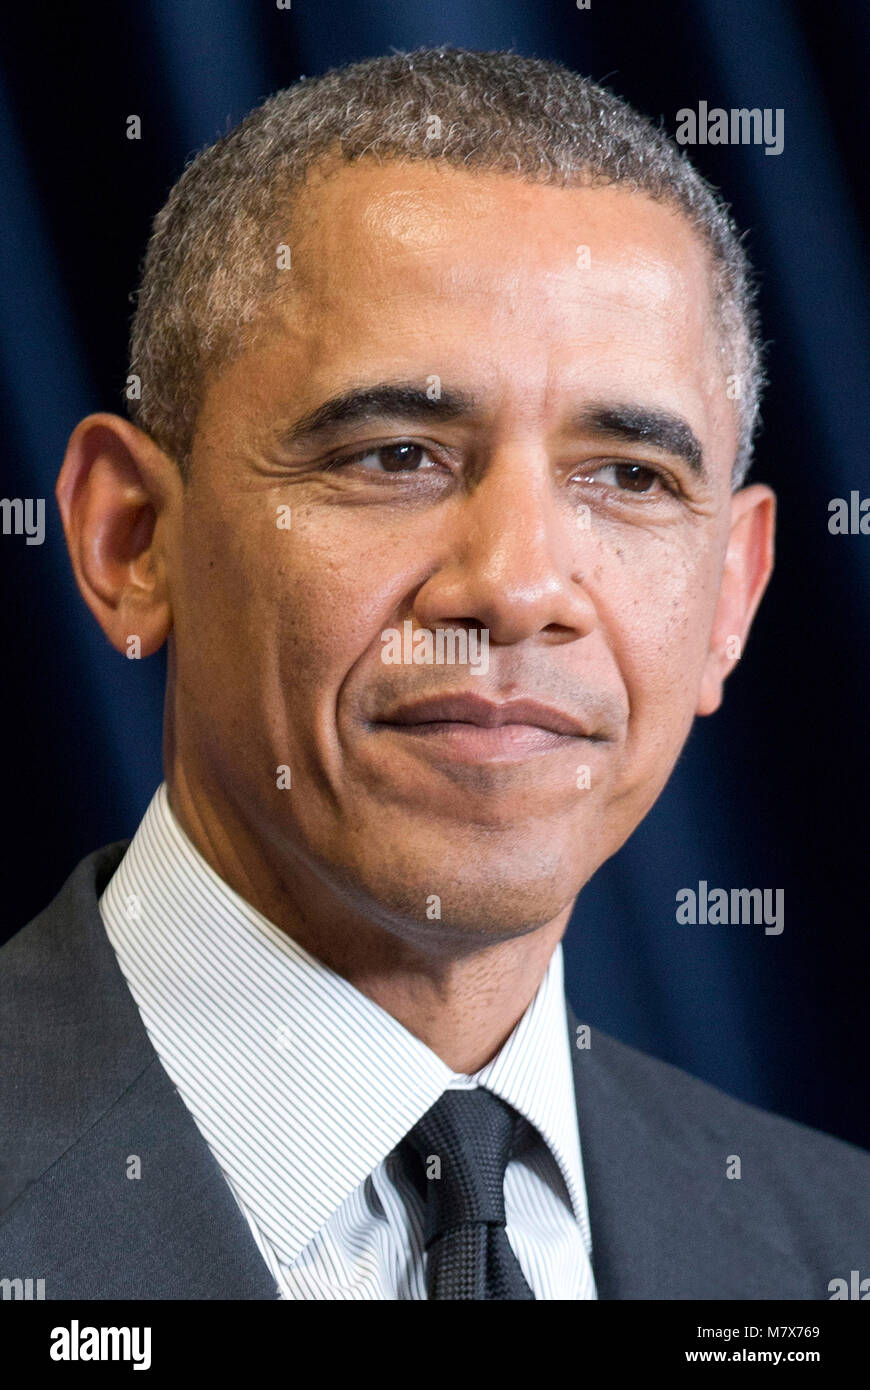 Barack Obama - *04.08.1961 - 44th President of the United States of America - Caution: For the editorial use only. Not for advertising or other commer Stock Photo